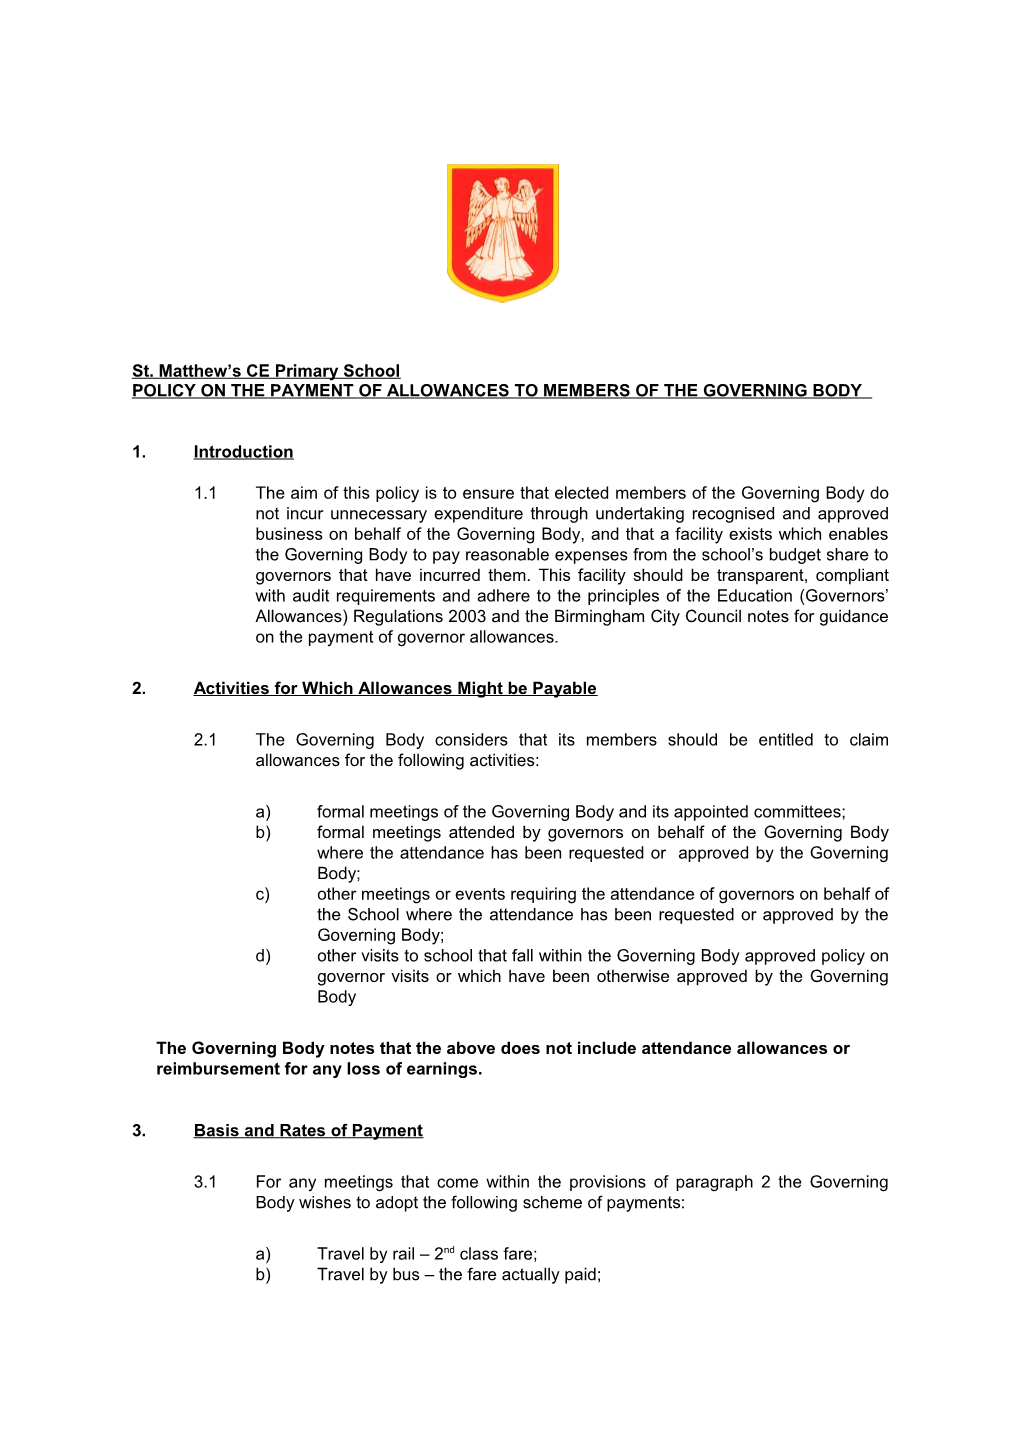 Policy on the Payment of Allowances to Members of the Governing Body